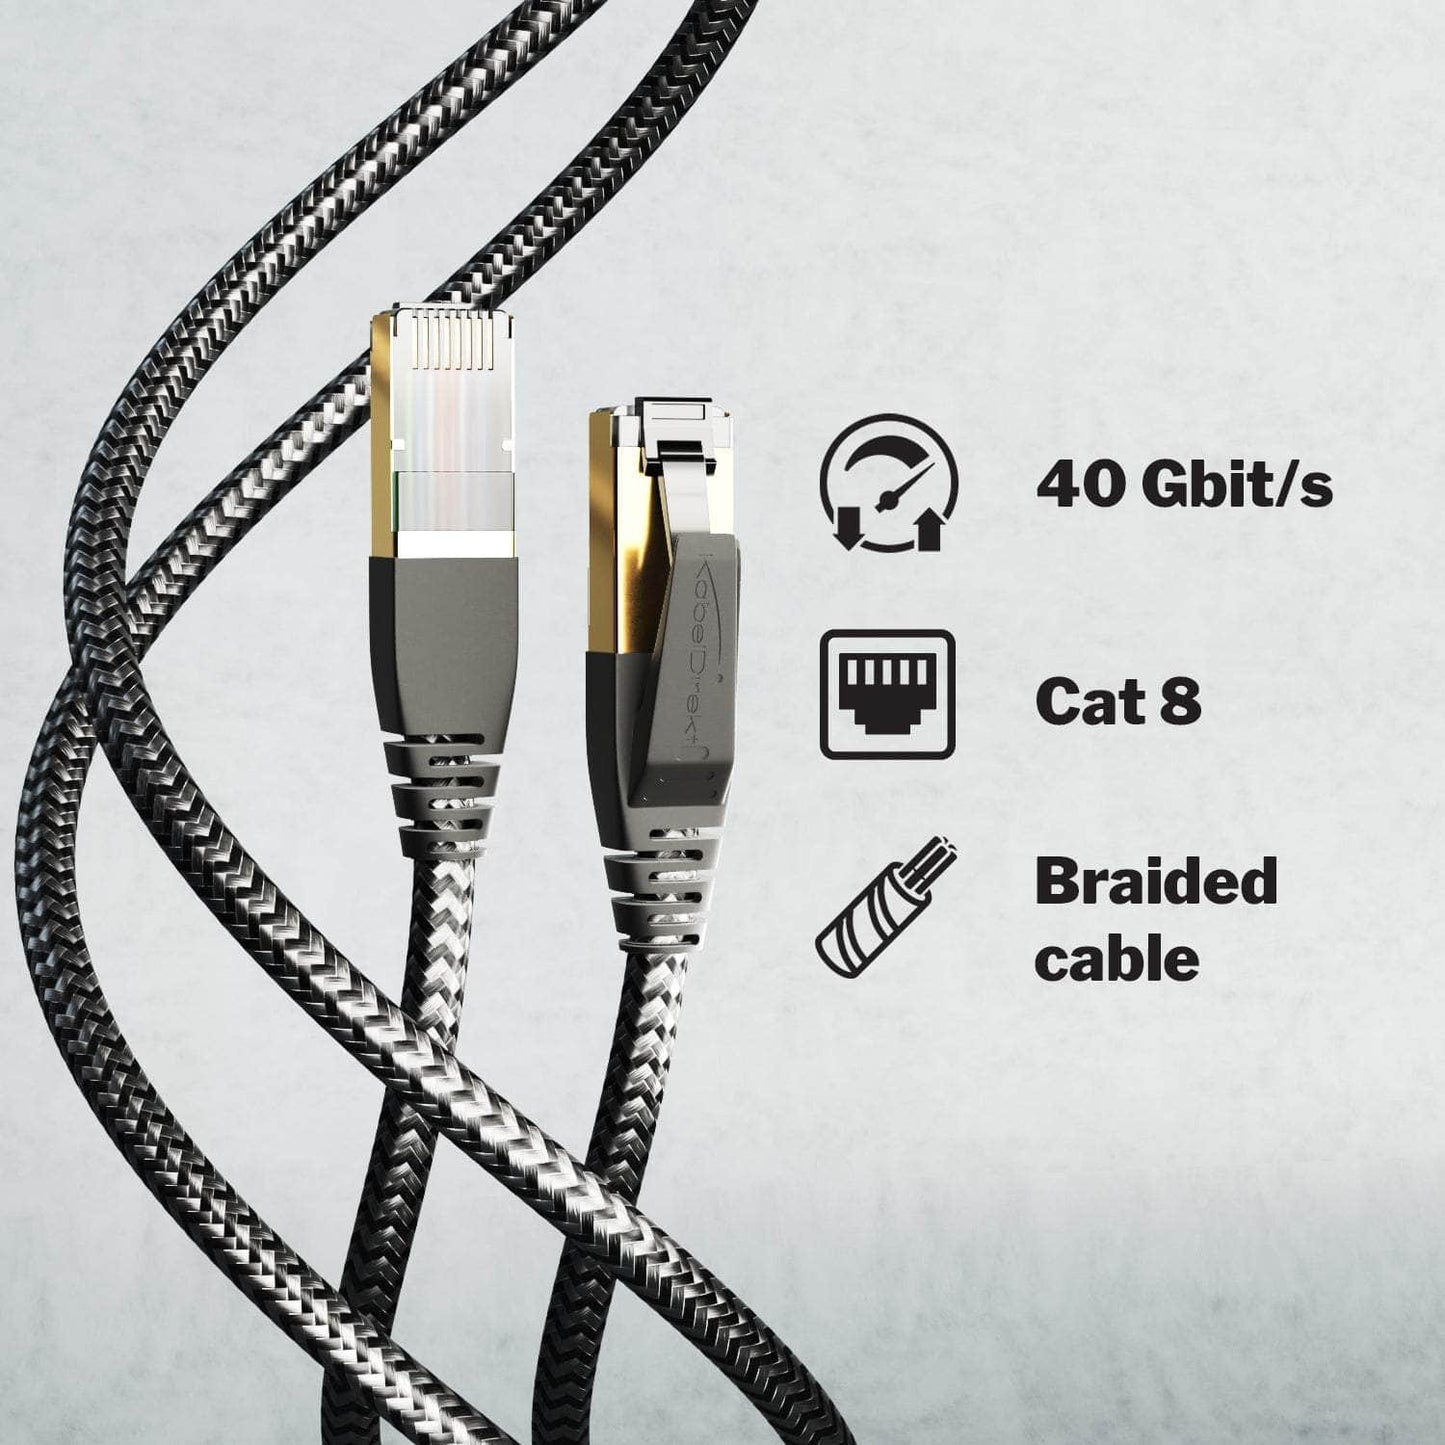 Cat 8 network cable with FlexMesh braiding - 40 Gbit/s Ethernet, LAN & patch cable